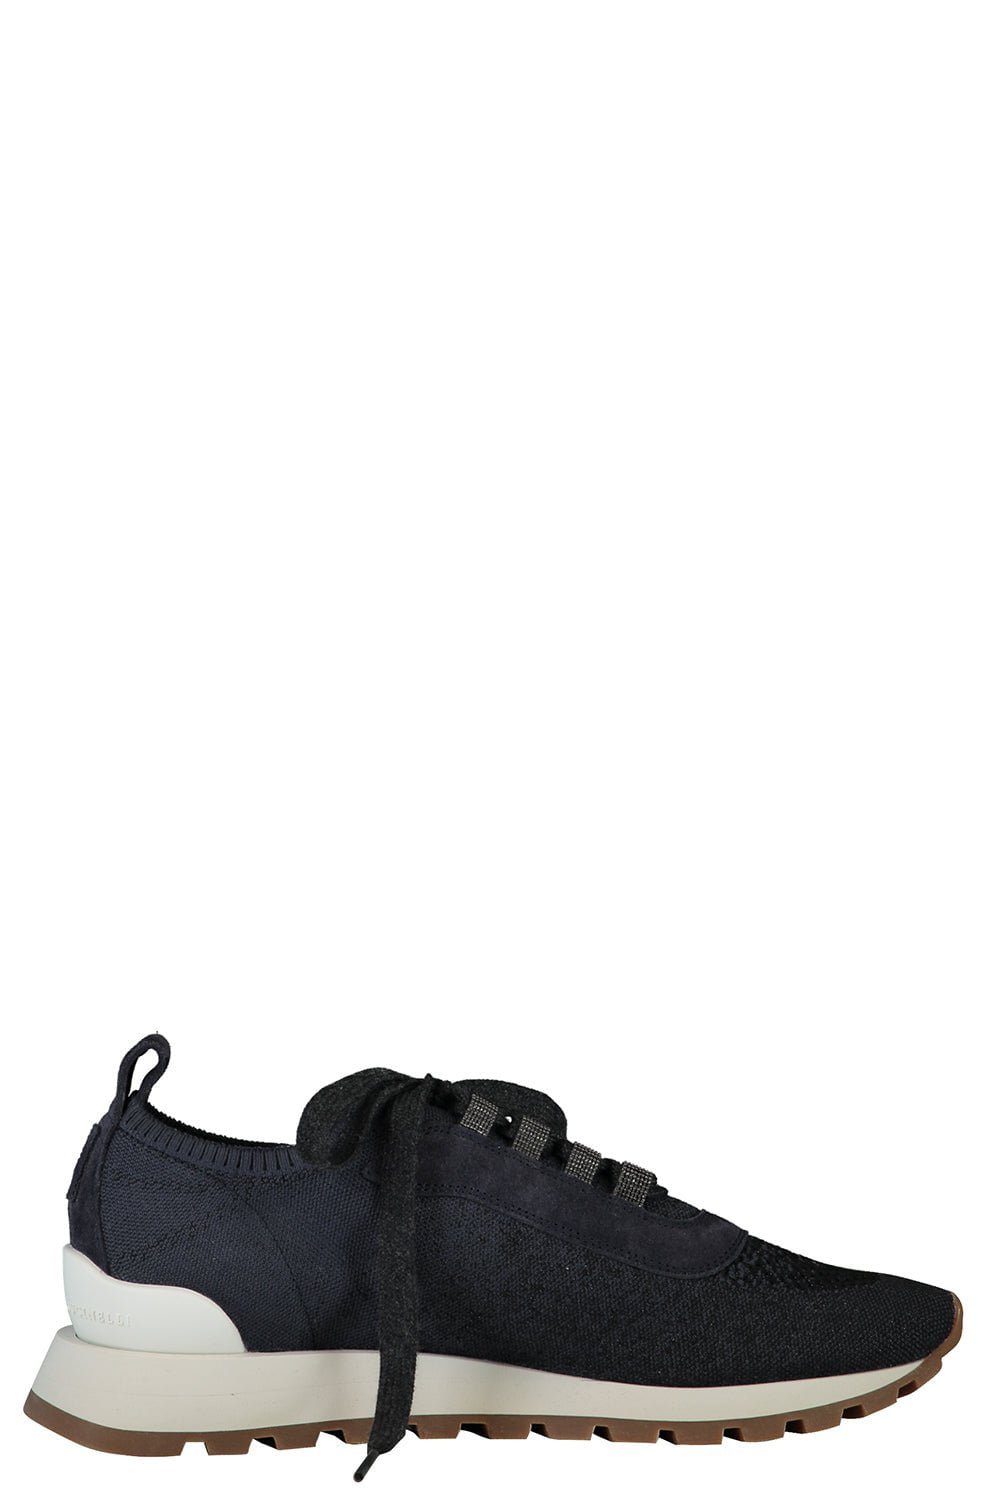 Sparkling Knit Sneakers SHOESNEAKER BRUNELLO CUCINELLI   